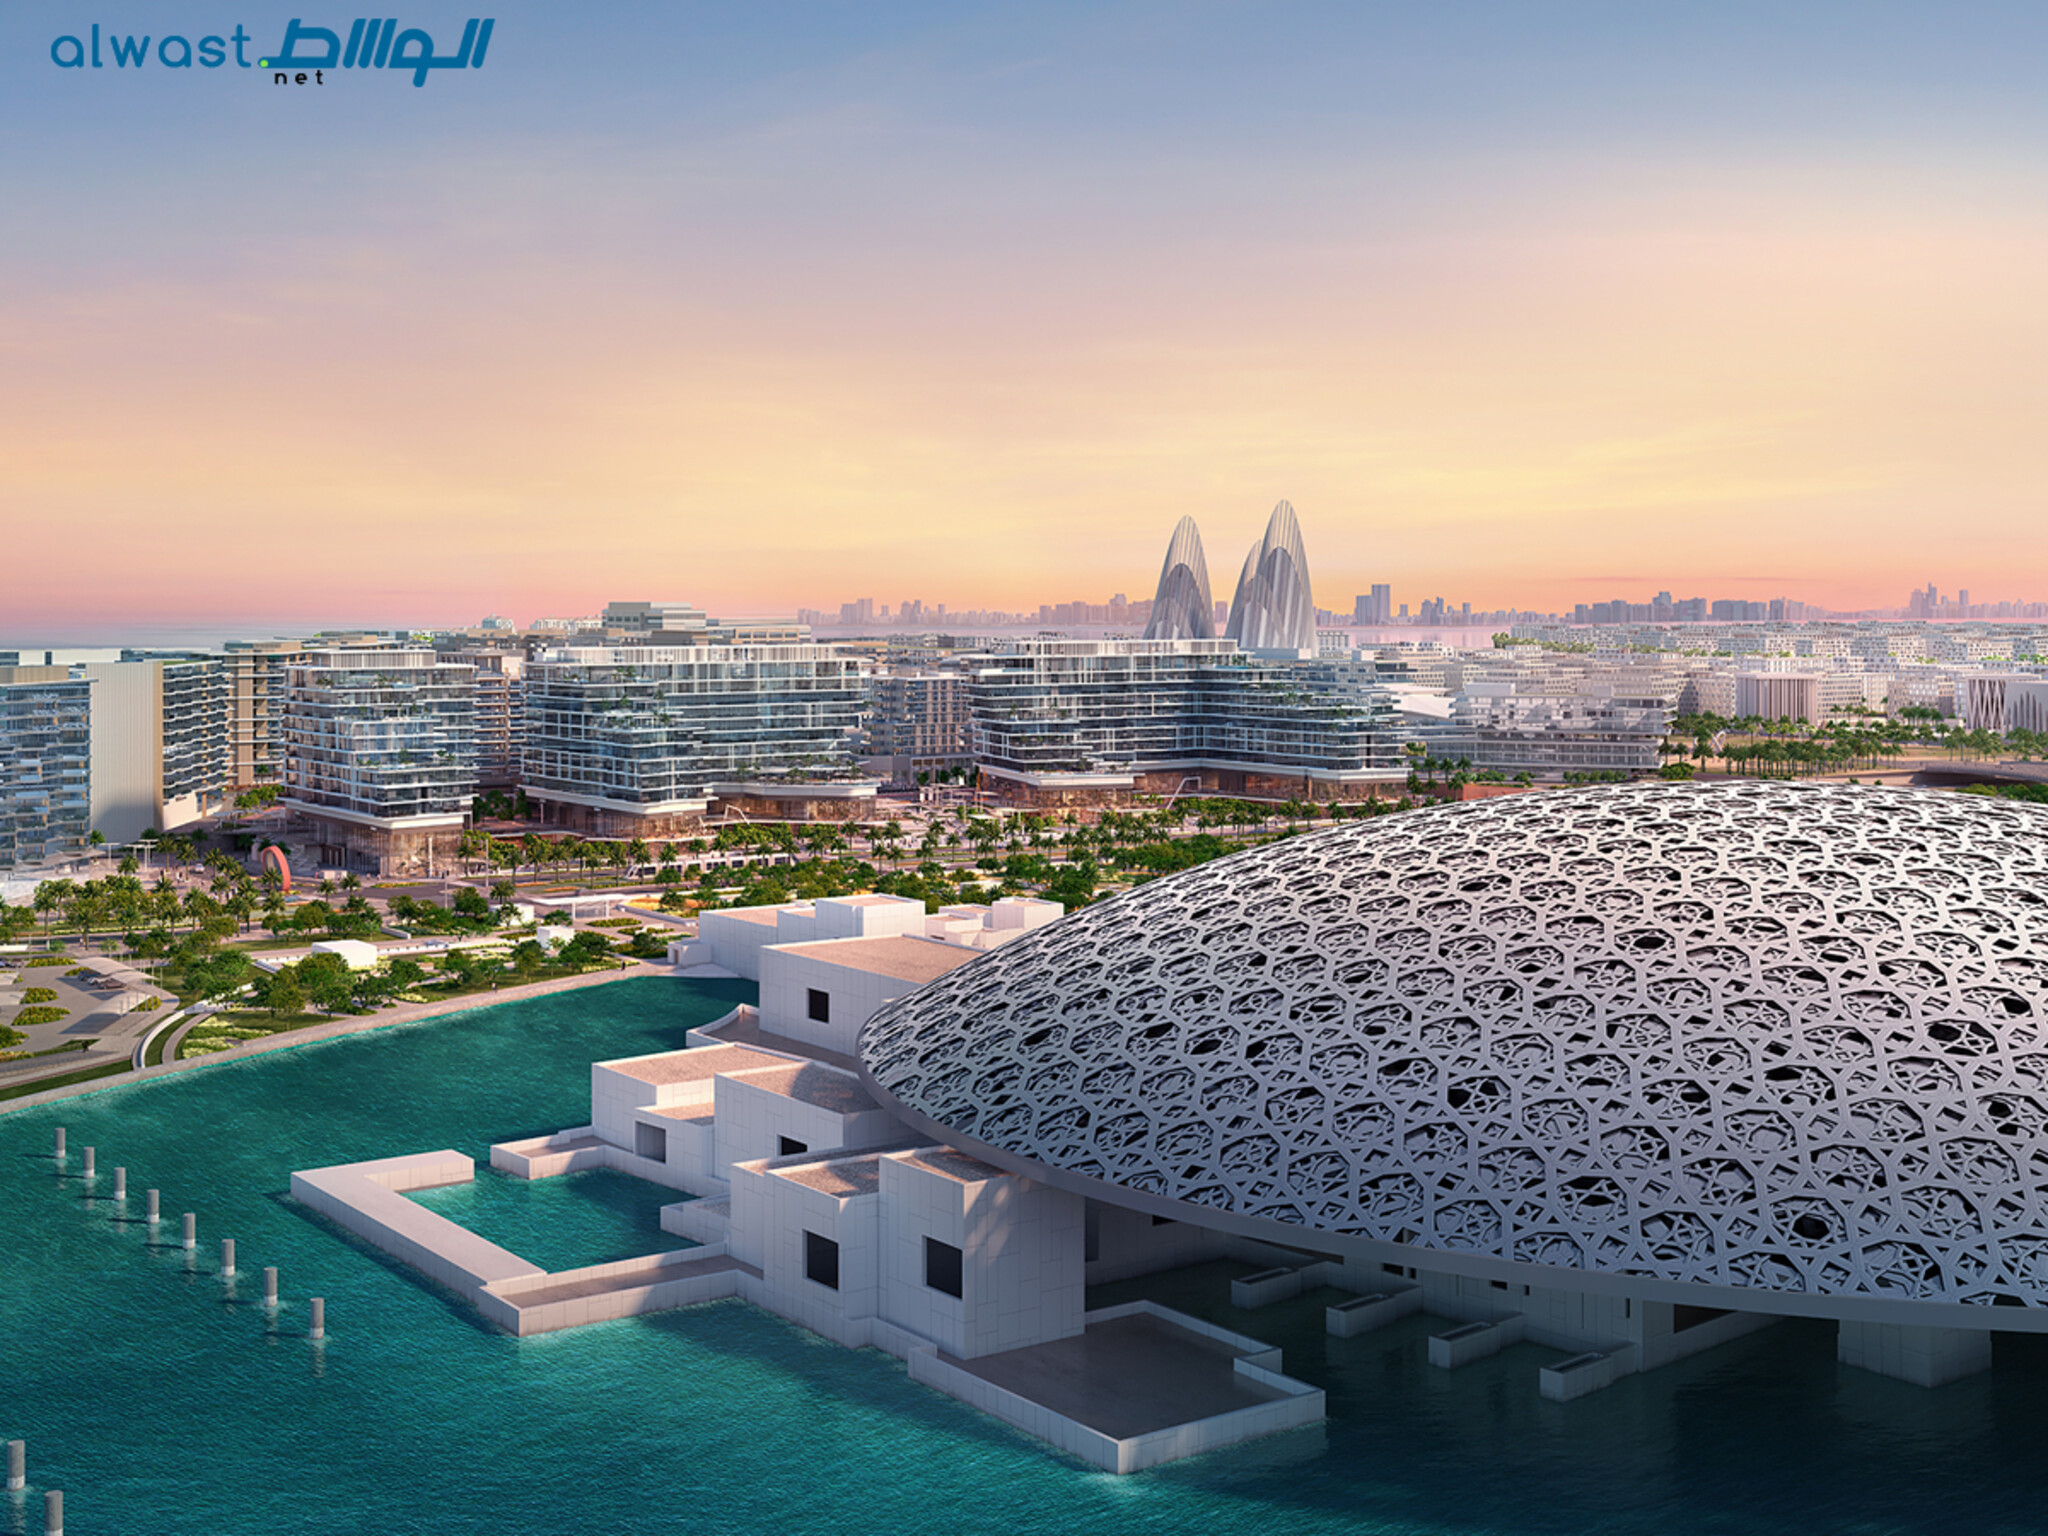  Louvre Abu Dhabi offers free entry for UAE residents on May 18 